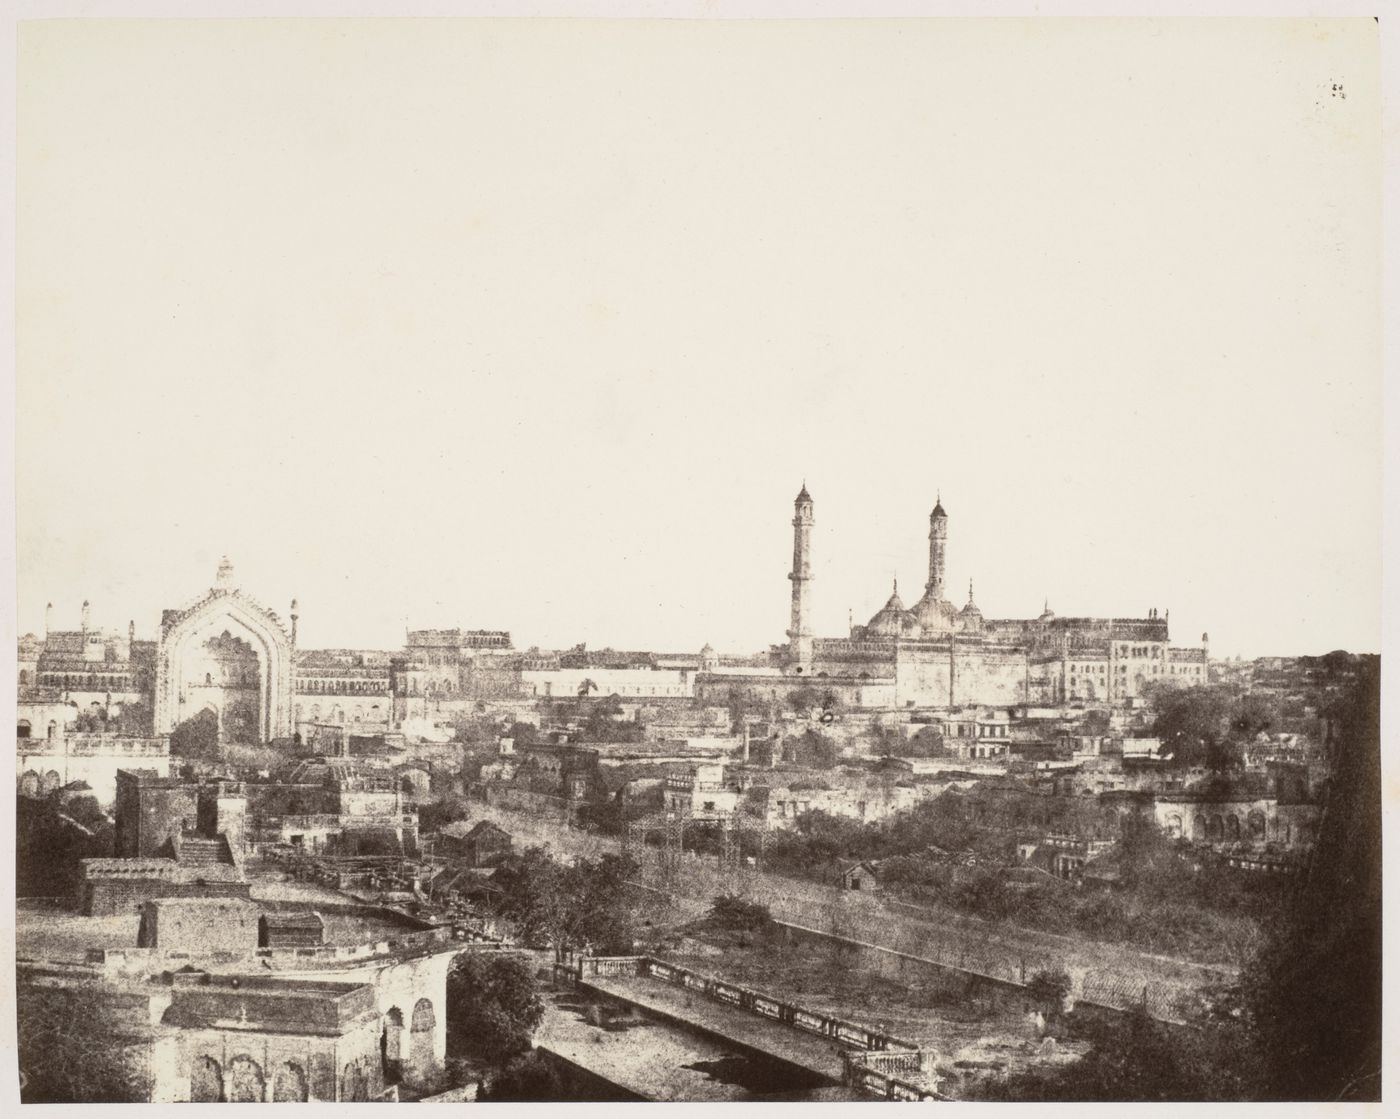 View of Lucknow, showing the west facade of the Rumi Darwaza, and the Great Imambara (also known as the Bara Imambara) in the vicinity, India